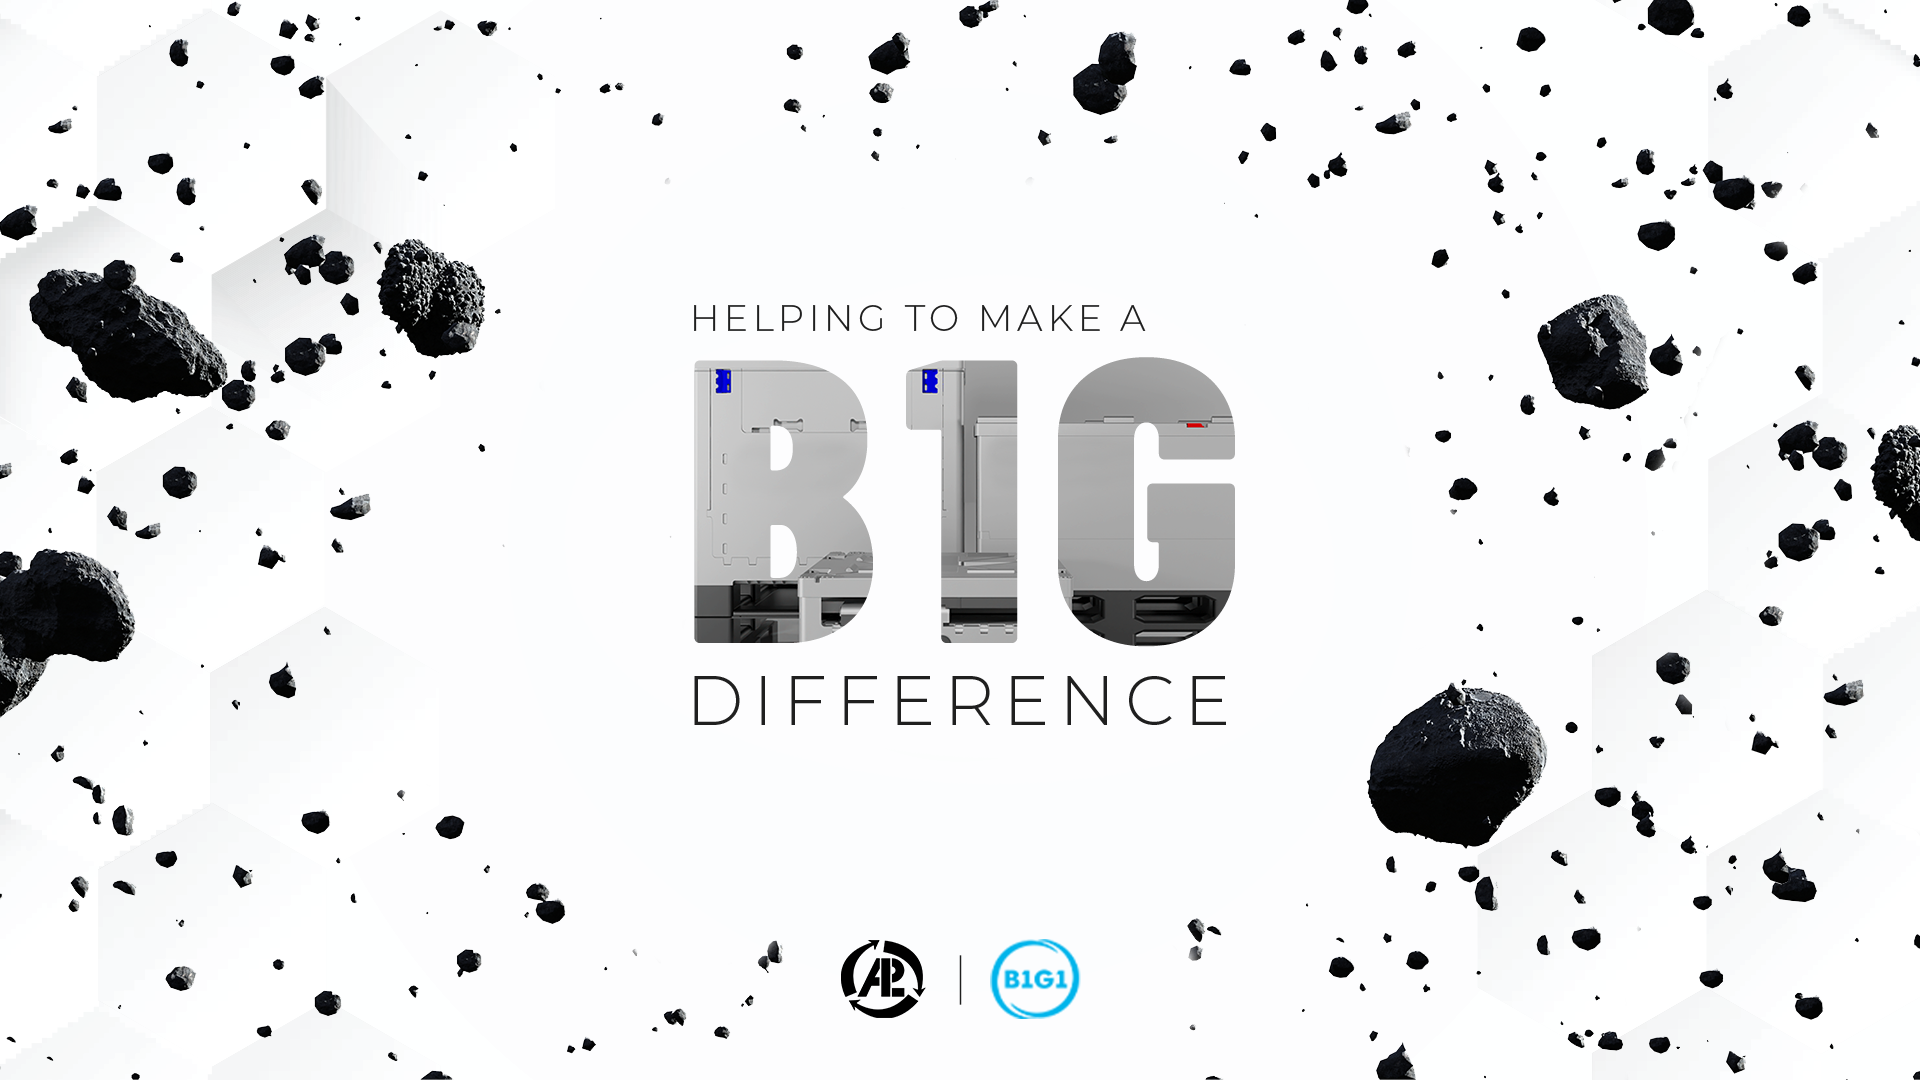 B1G1 – How Your ALLpaQ Purchase Can Make a B1G Difference